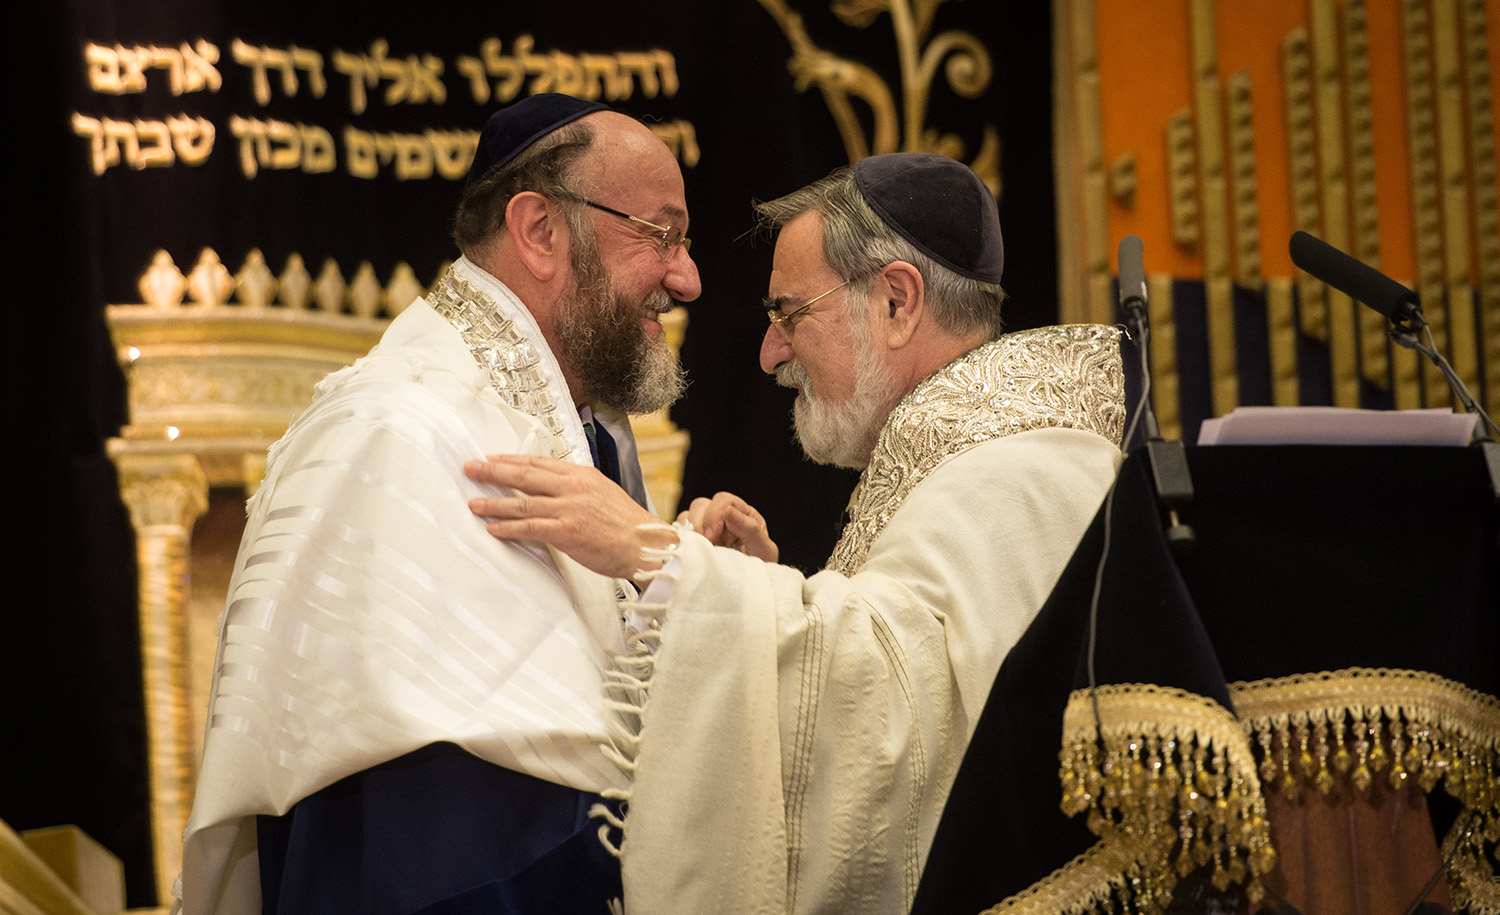 Rabbi Lord Jonathan Sacks, right, congratulates Ephraim Mirvis, his successor as chief rabbi of the United Hebrew Congregations of the UK and the Commonwealth, during a ceremony at the St. John&#8217;s Wood Synagogue in north London on September 1, 2013. STEFAN ROUSSEAU/AFP via Getty Images.
